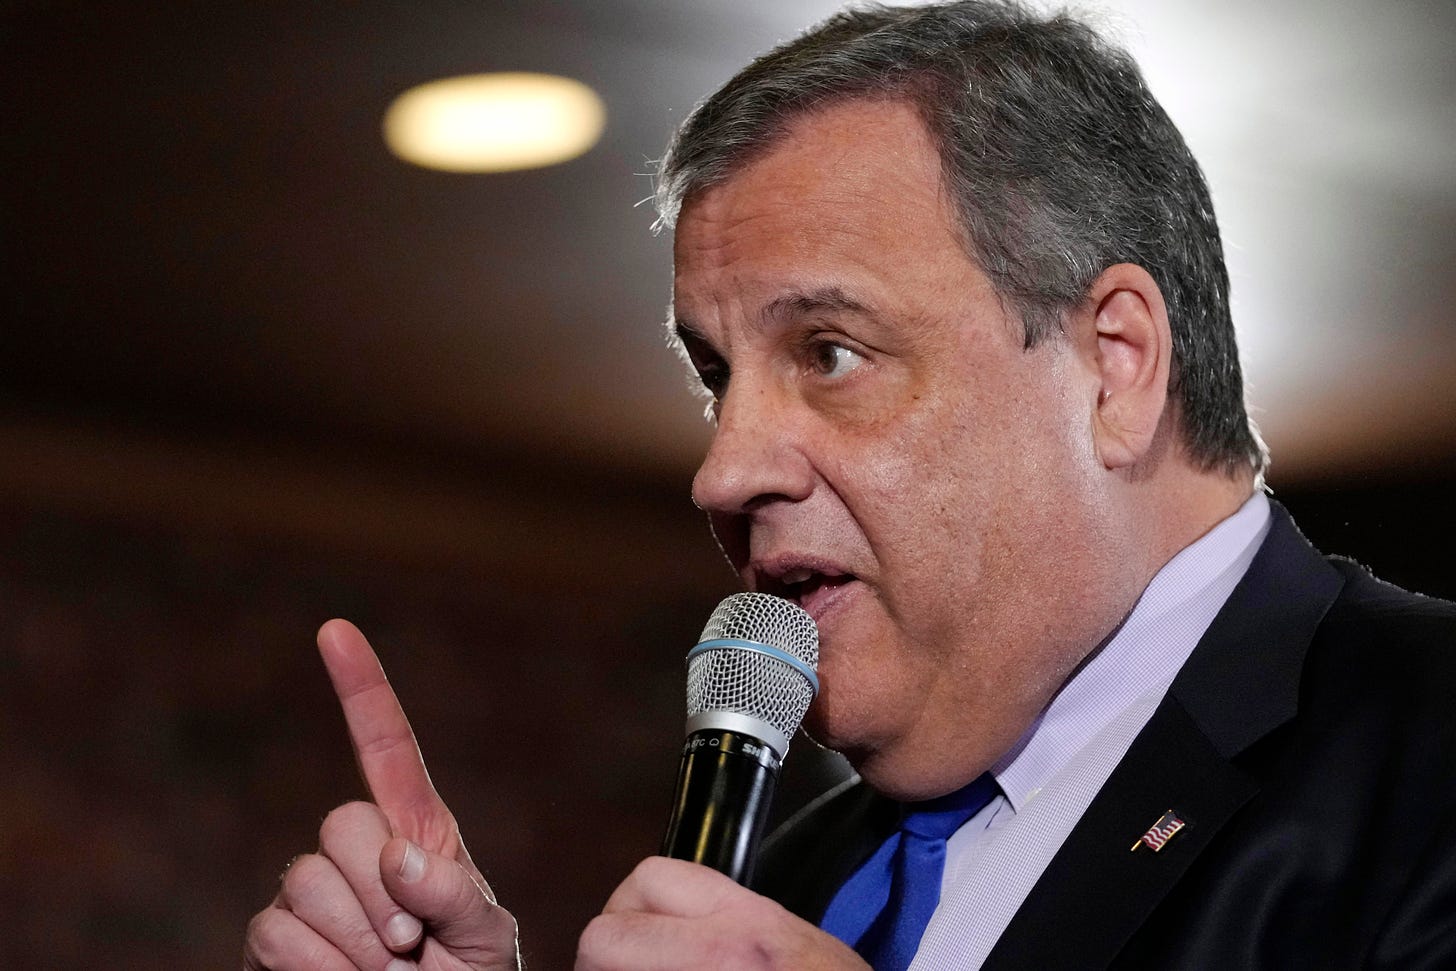 Republican presidential candidate former New Jersey Gov. Chris Christie speaks at a town hall campaign event.